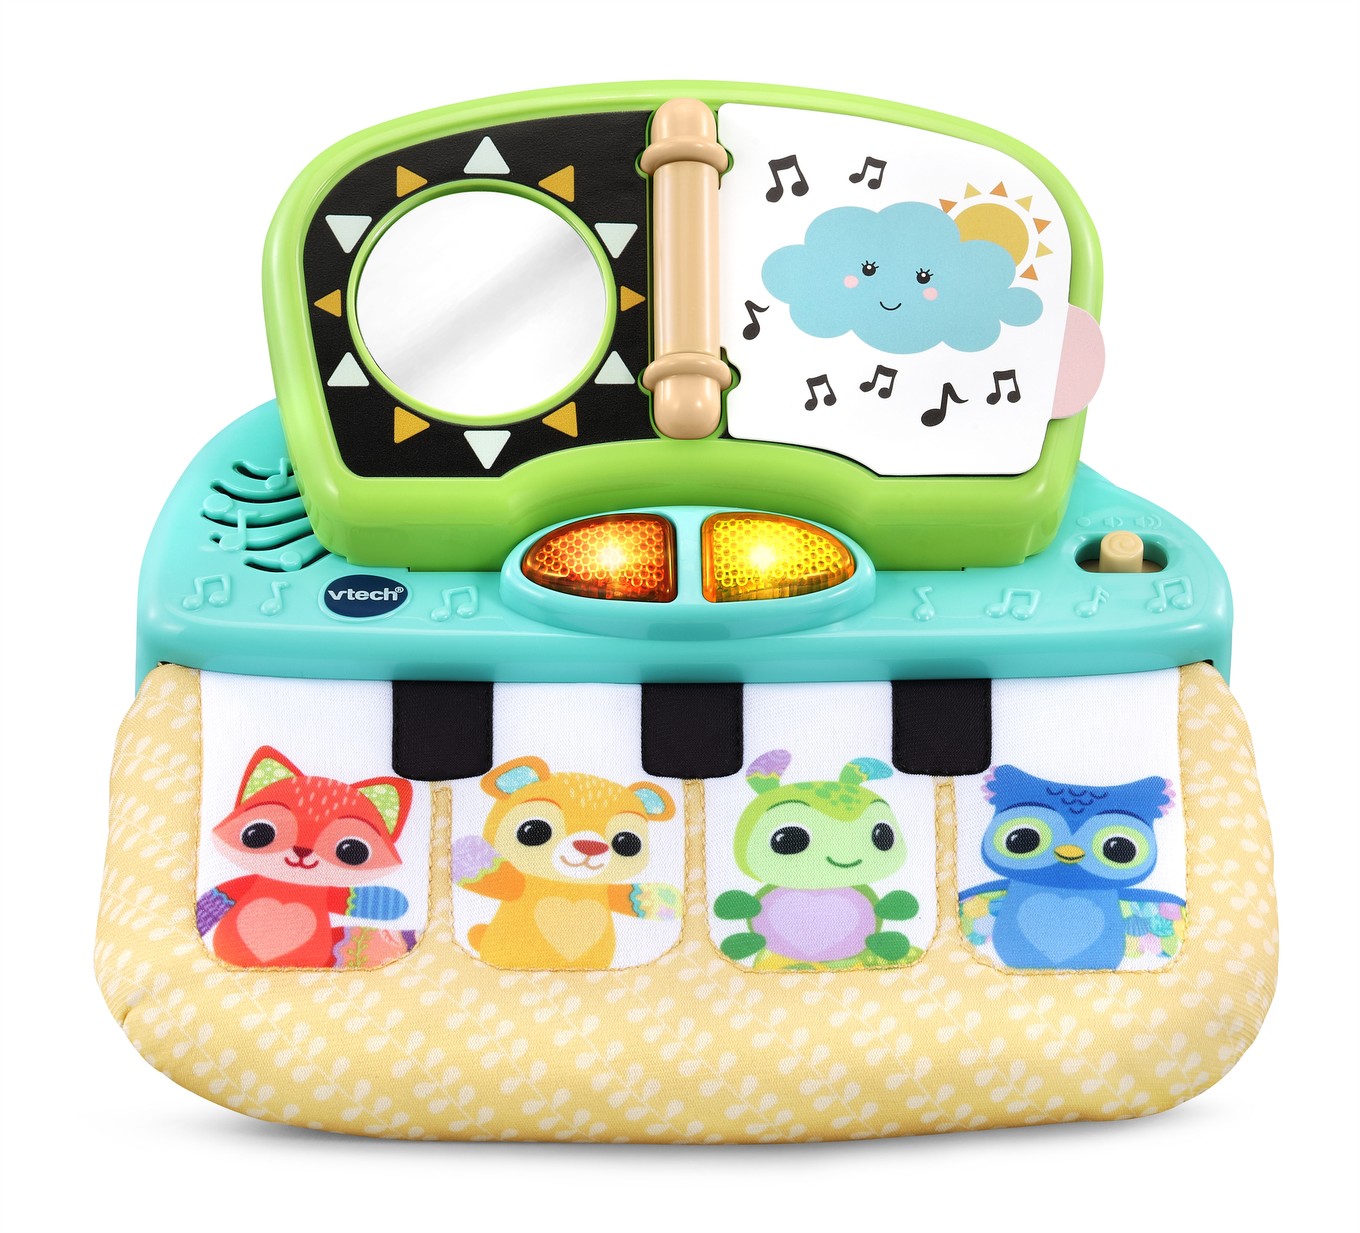 VTech® 3-in-1 Tummy Time to Toddler Piano™ Toy for Babies and Toddlers